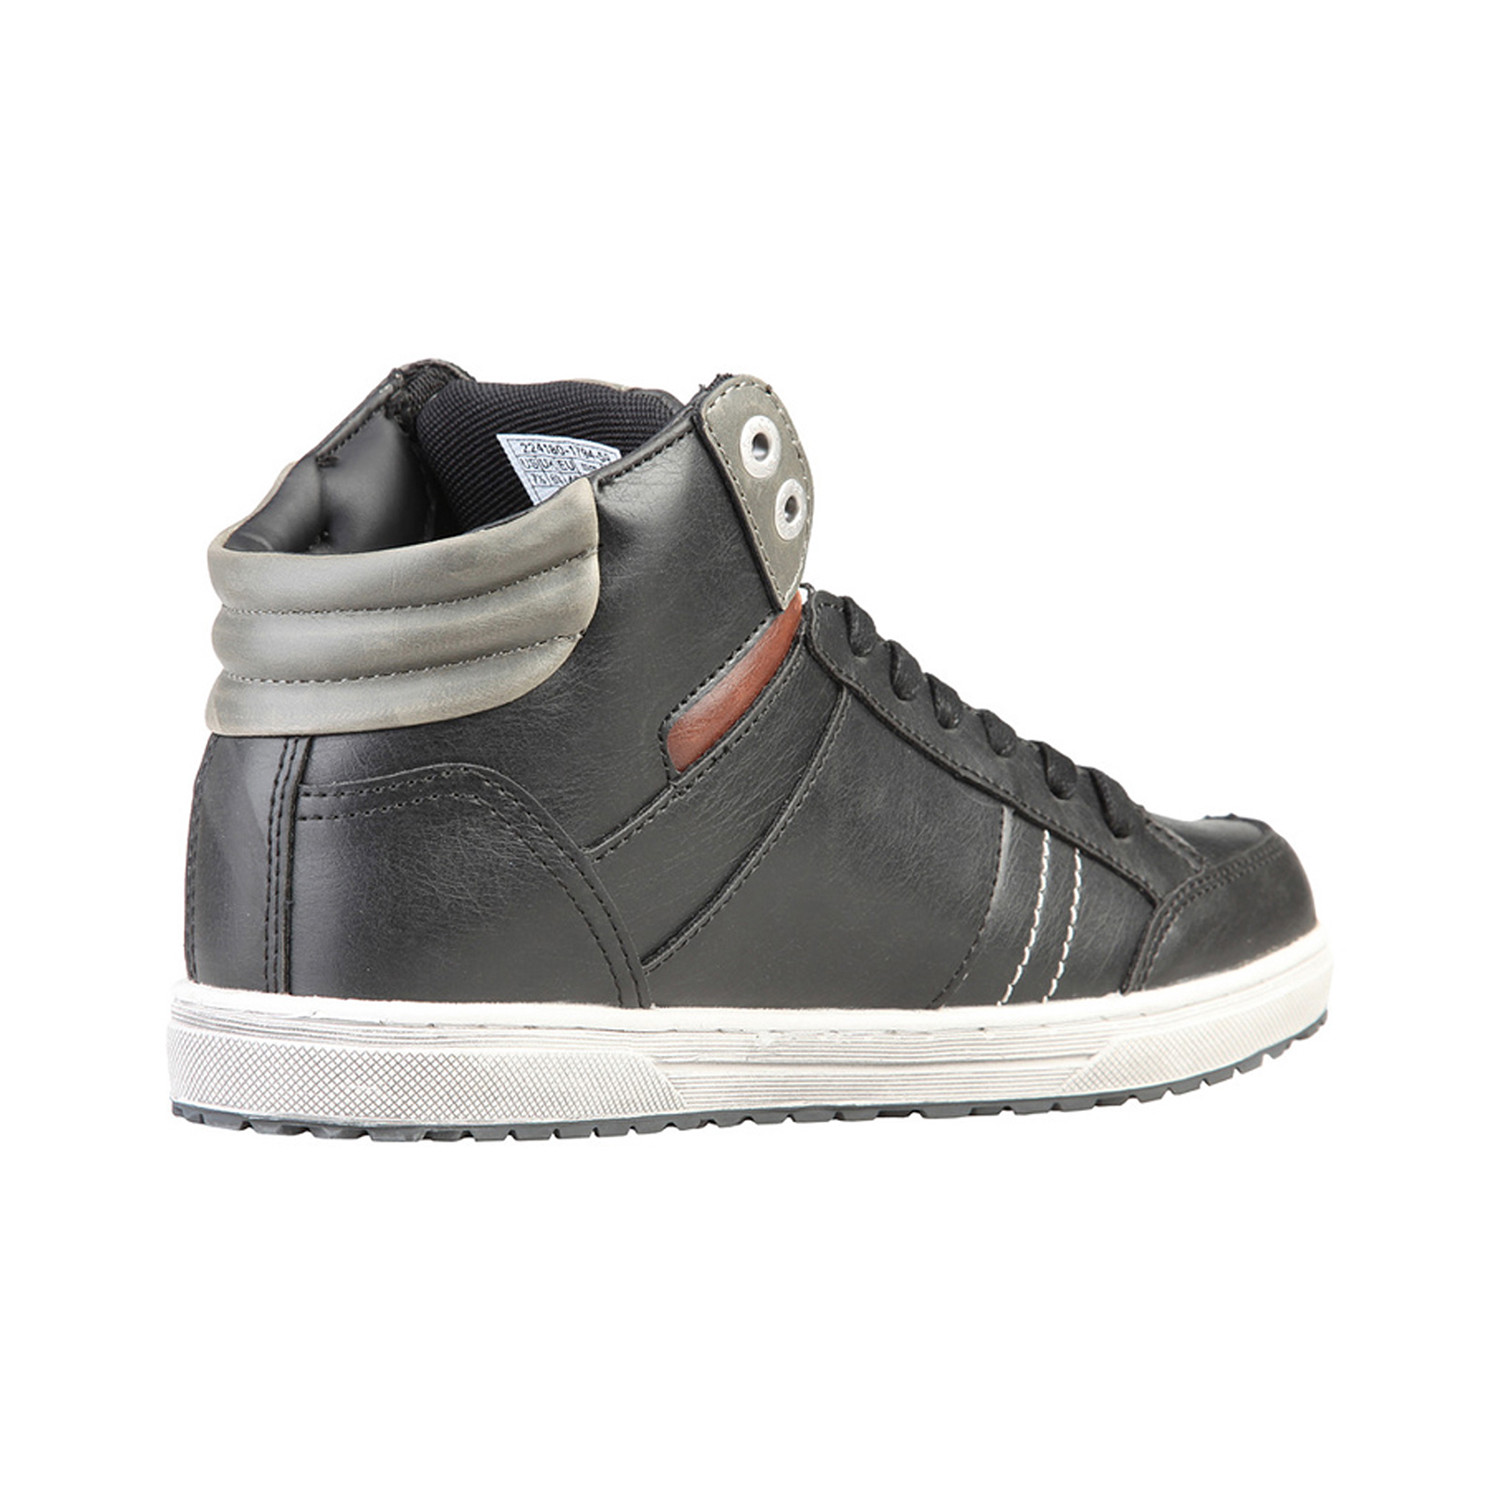 Levis Sneaker // High Top // Black + White (Euro: 41) - CLEARANCE ...